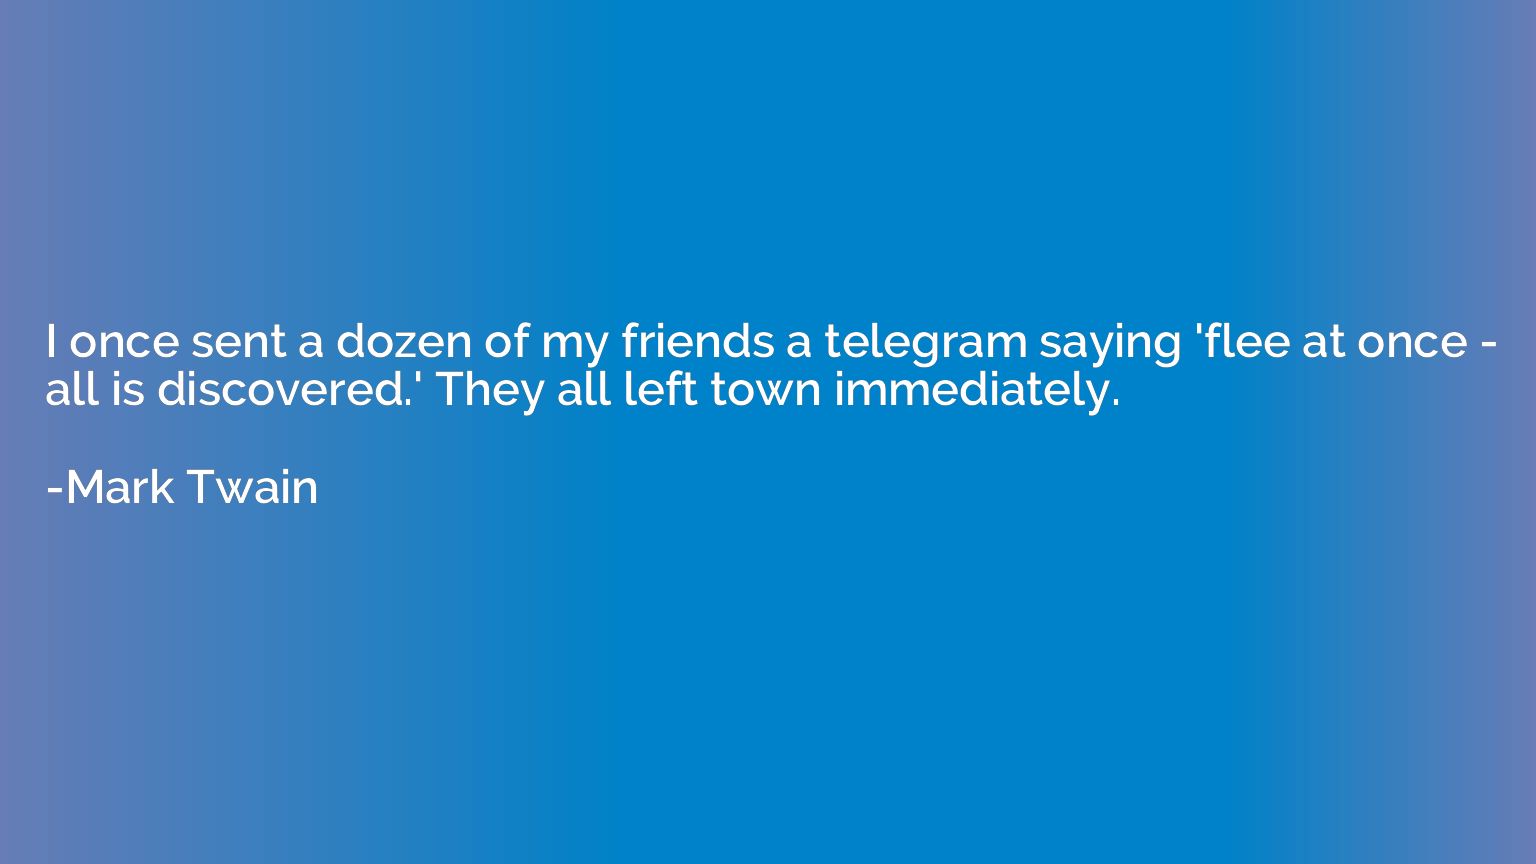 I once sent a dozen of my friends a telegram saying 'flee at